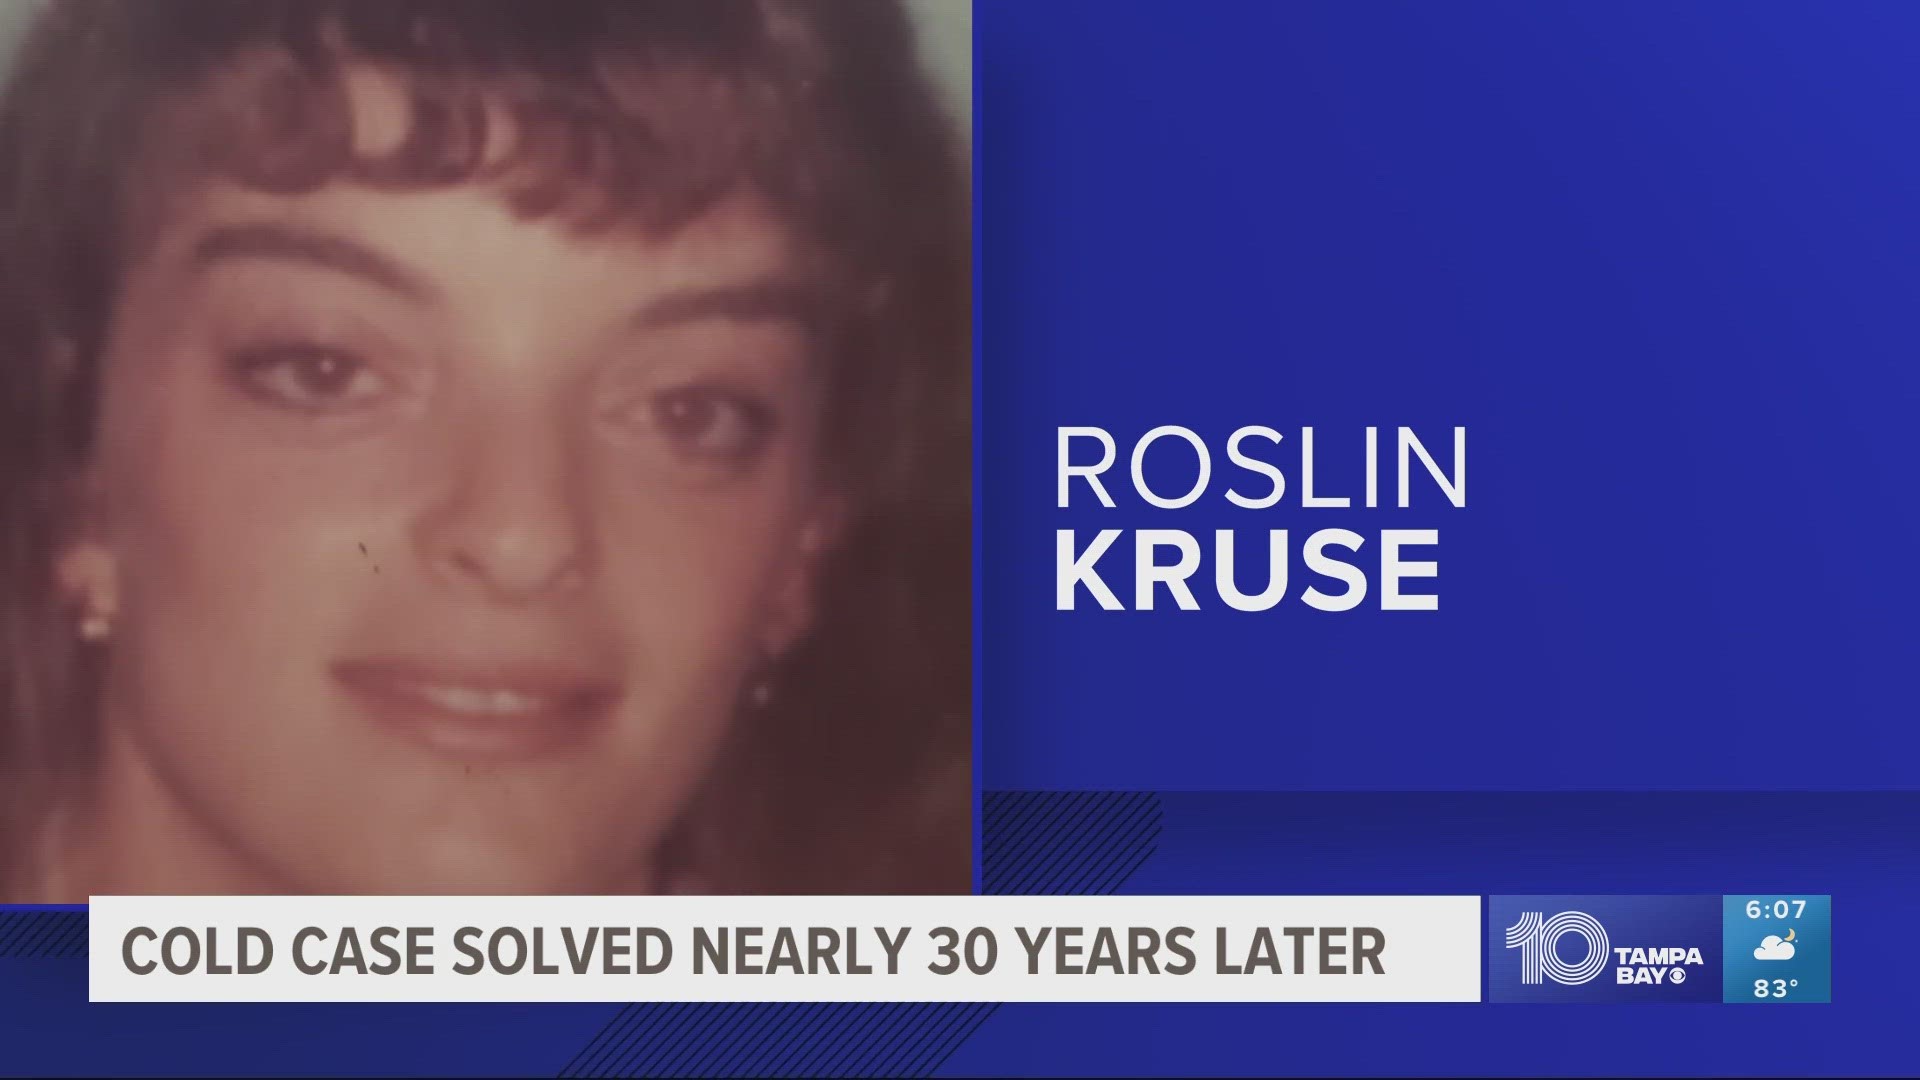 Roslin Kruse was just 23 years old when she was murdered and found by the side of the road on Nov. 1, 1993.